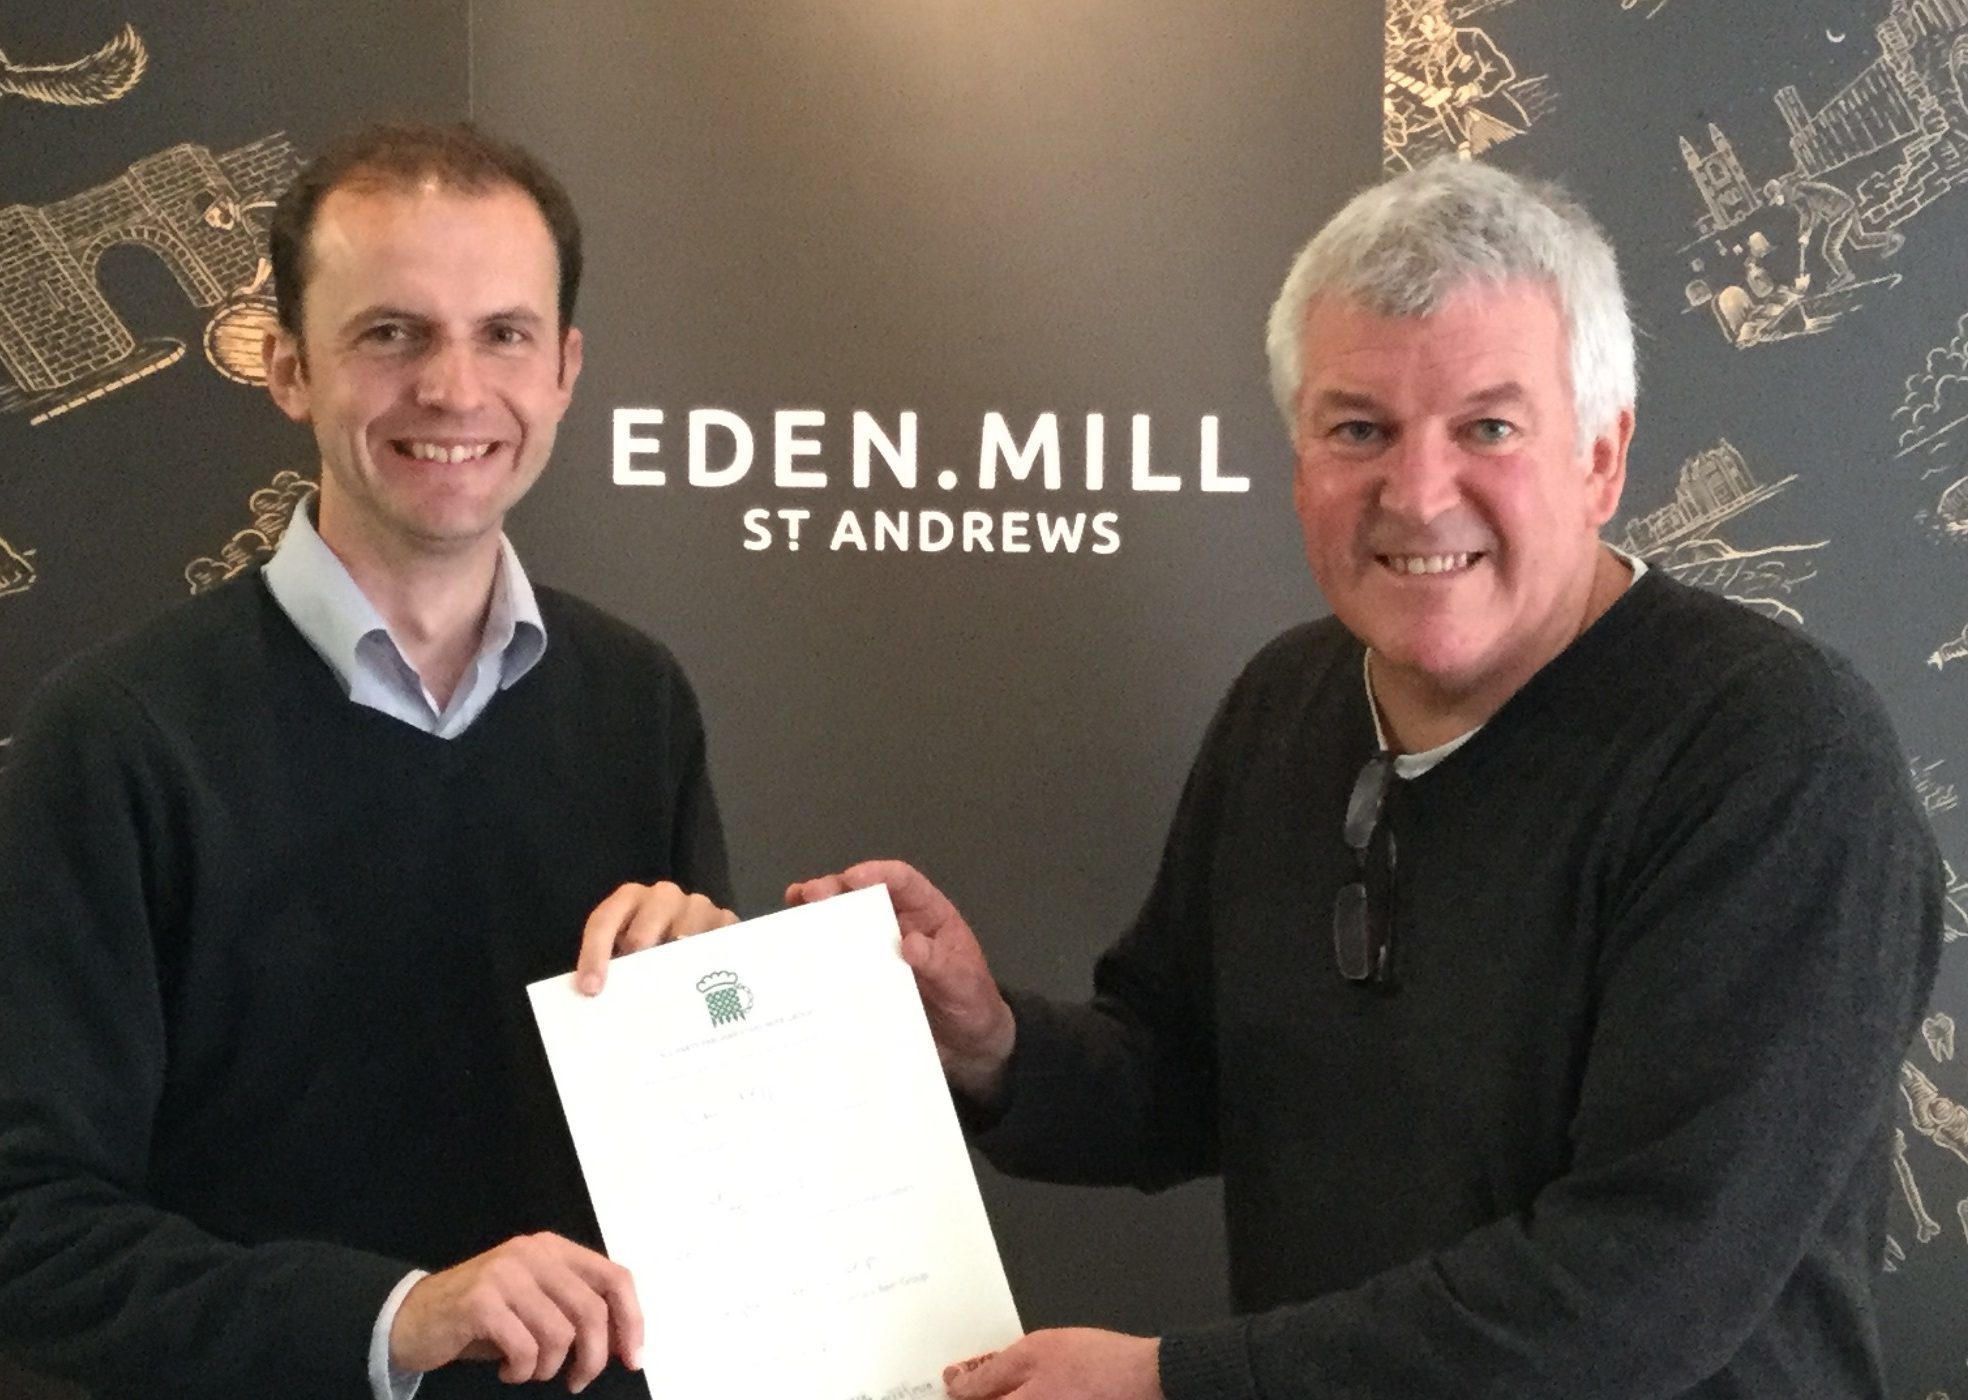 North East Fife MP Stephen Gethins presents a certificate to Eden Mill founder Paul Miller